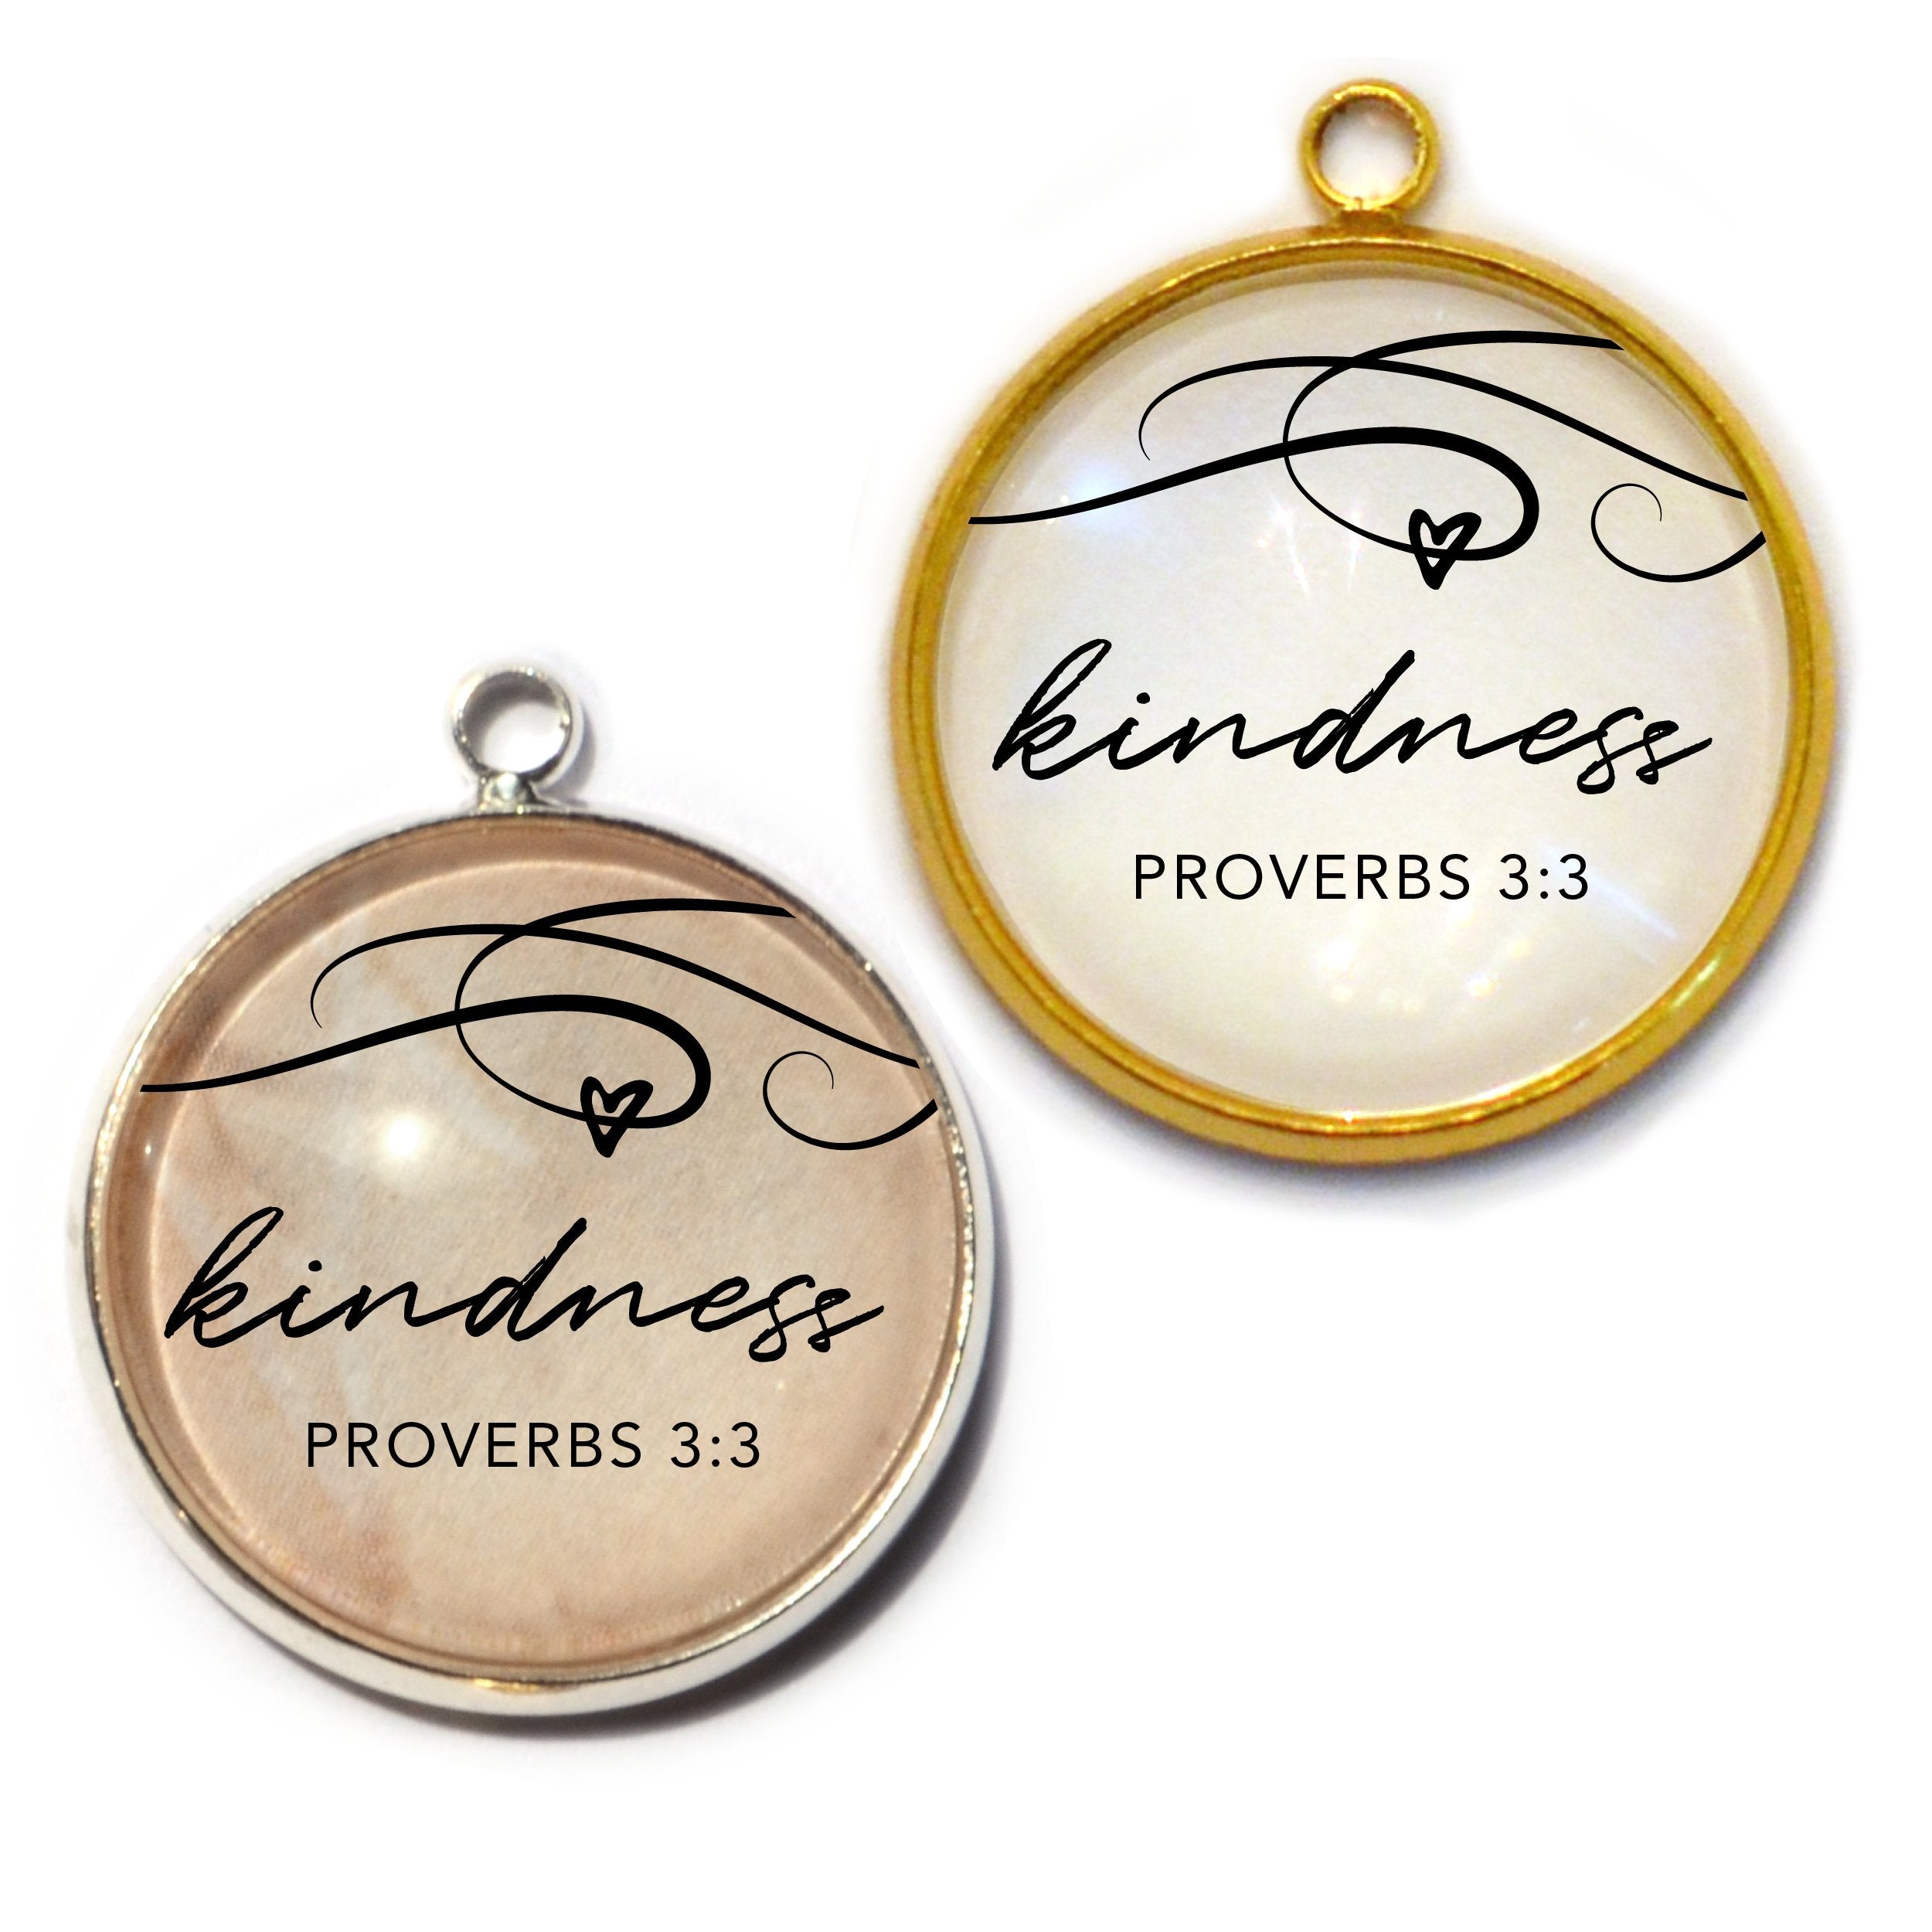 Spread Kindness Proverbs 3:3 Glass Charm for DIY Jewelry, 20mm Diameter - Pendants, Stones & Charms - Bijou Her -  -  - 